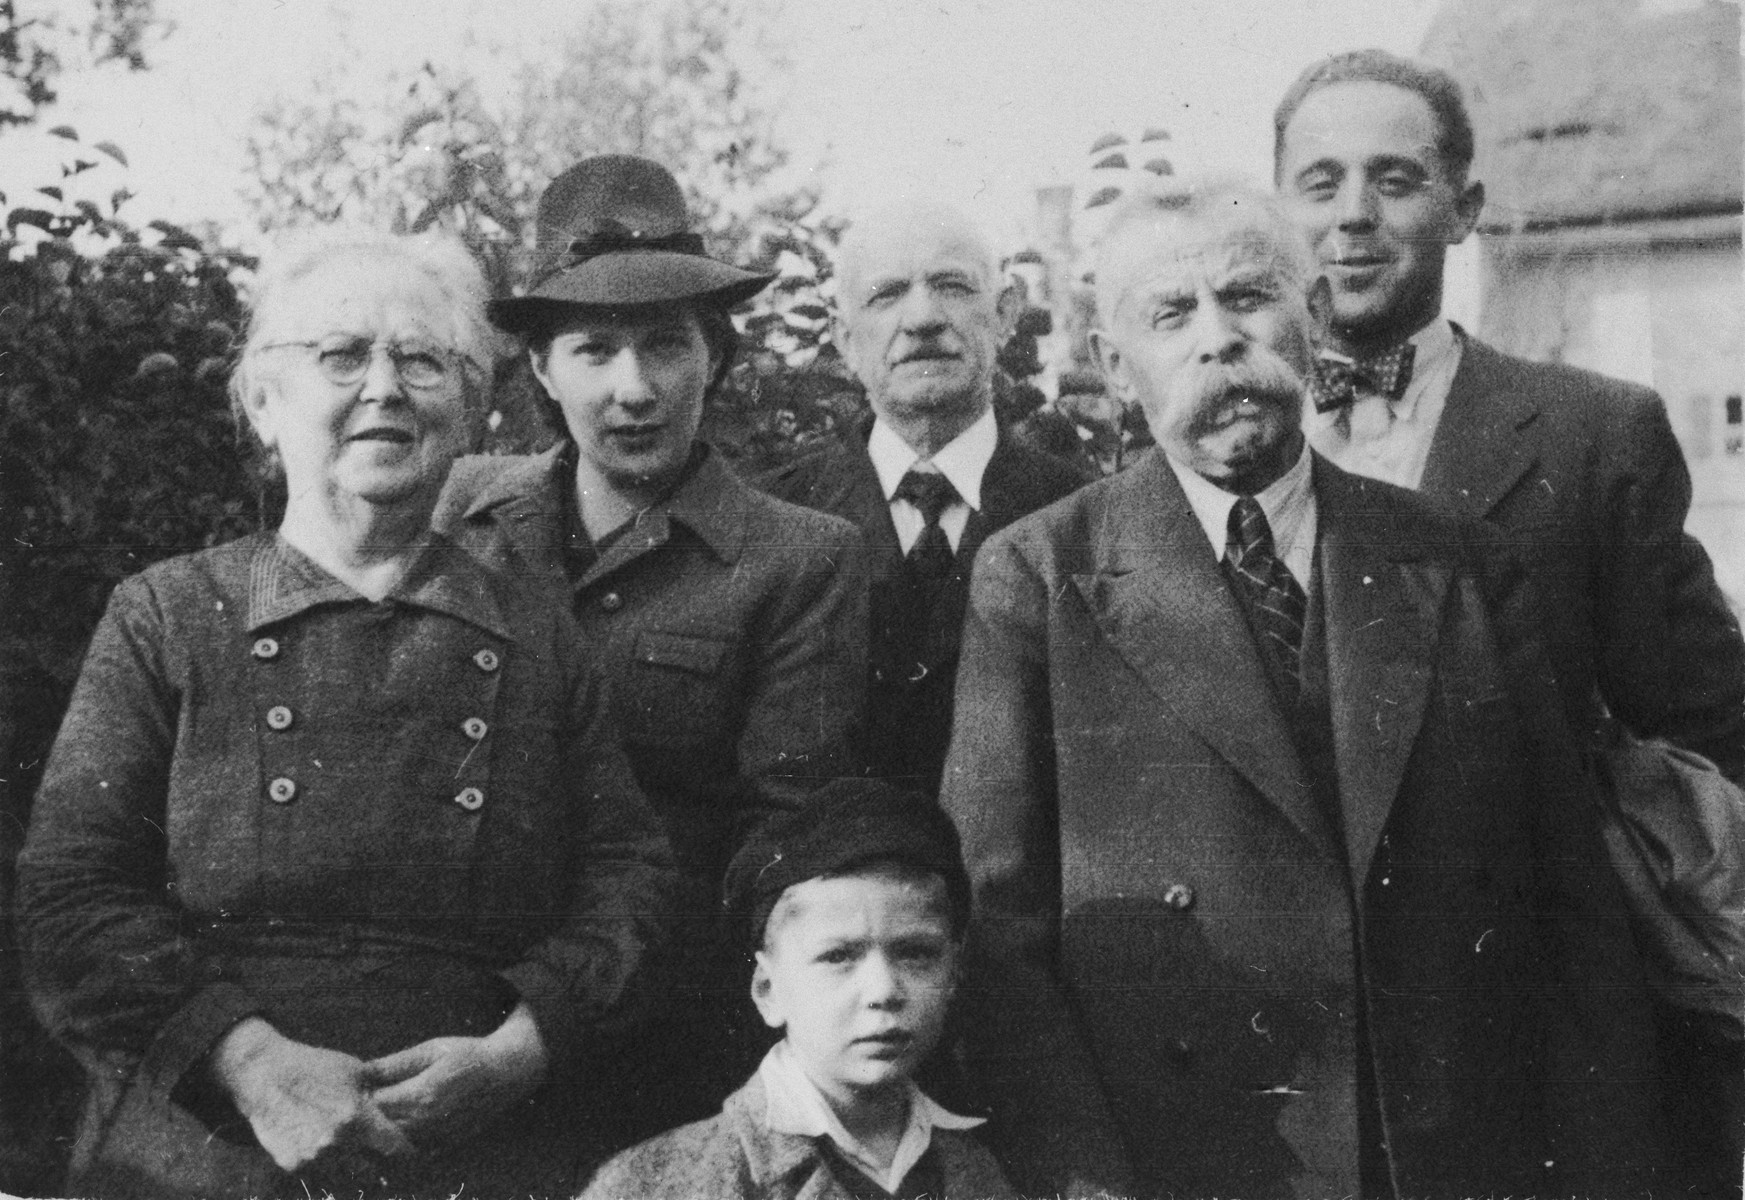 Julius and Fanny Goldstein pose with their son, Bohus, and members of his family.  

Pictured from left to right are Fanny, Wilma Goldstein, Michael, Max Redlich (Wilma's father), Julius and Bohus.  Bohus and Wilma (Redlich) Goldstein had two children, Eva and Michael.  The family lived in Olomouc, where Bohus worked for the Prague autoworks.  They all perished during the war.